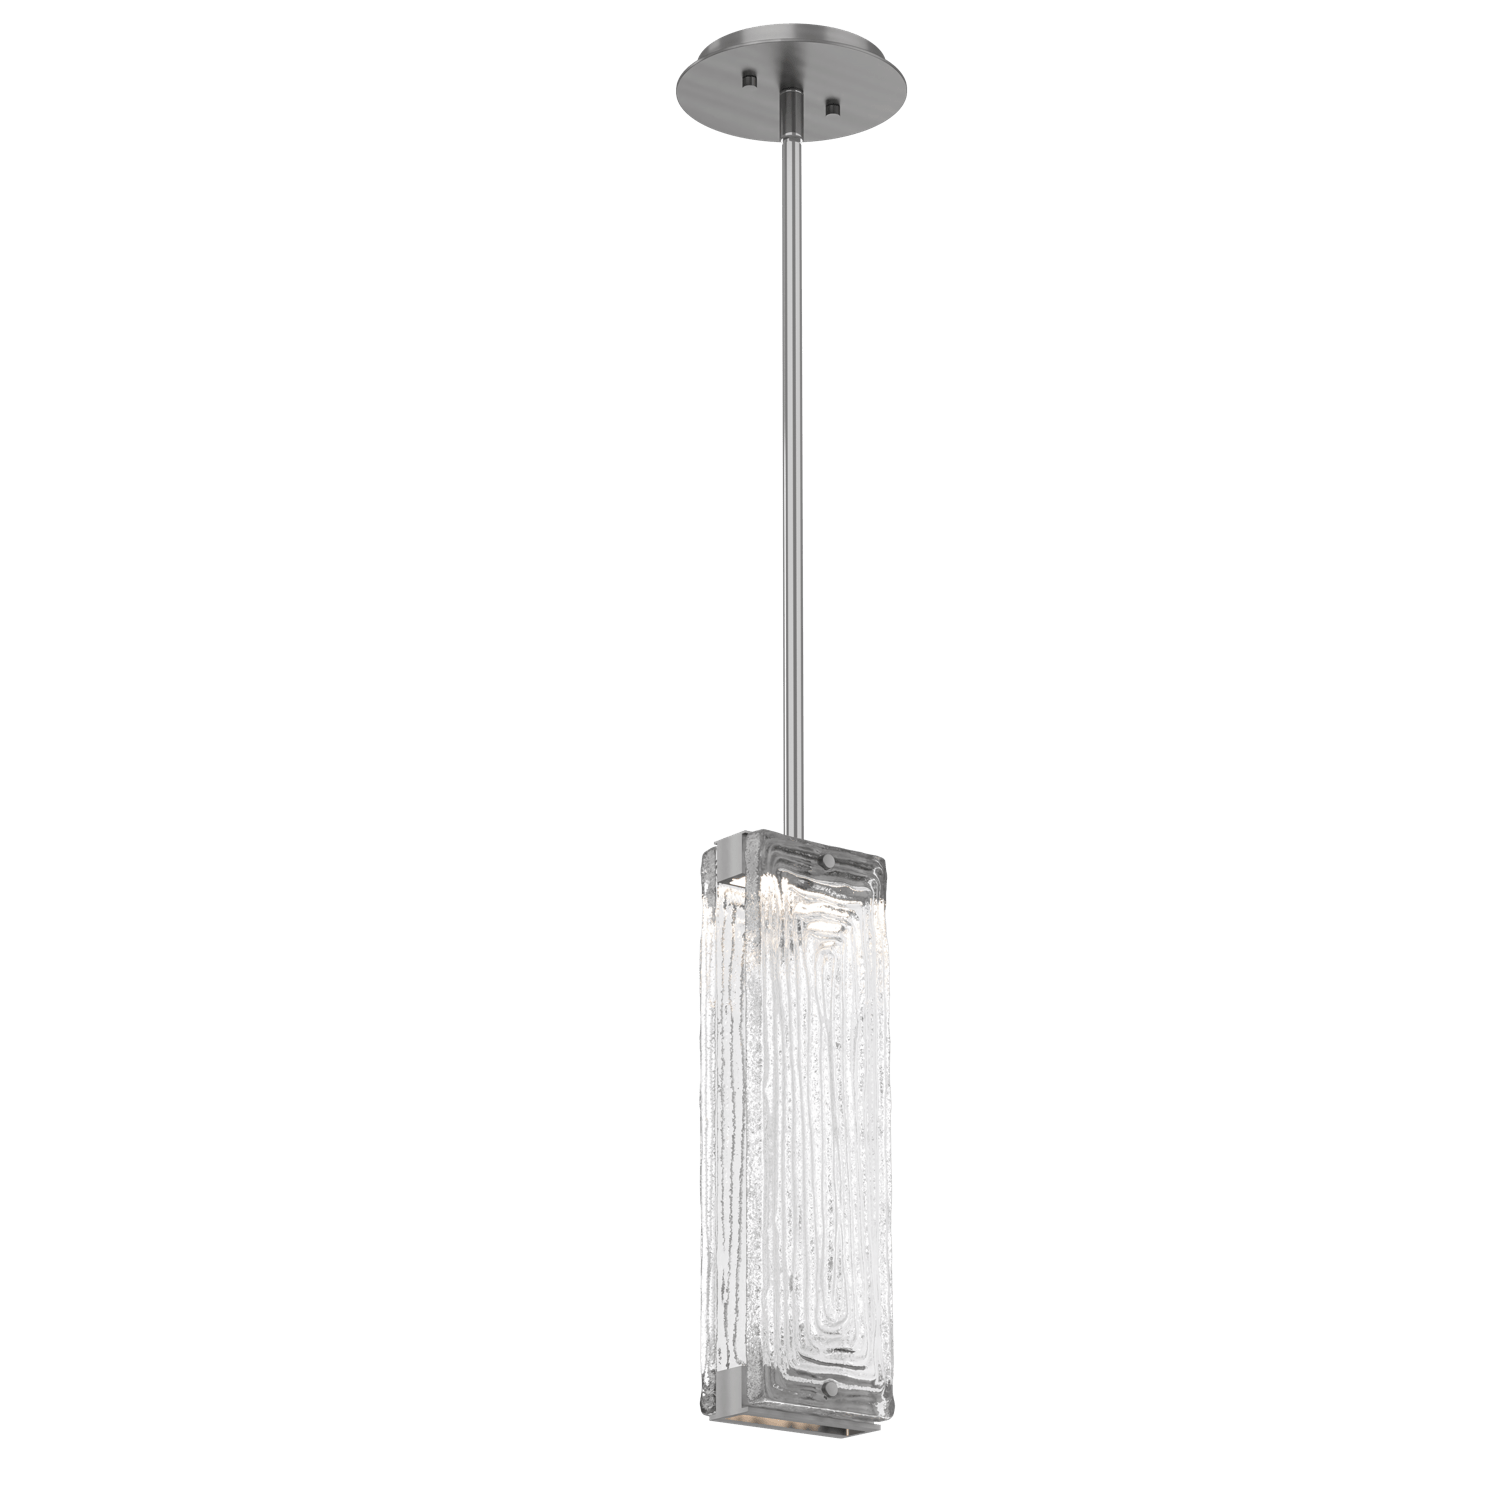 LAB0090-01-SN-TL-Hammerton-Studio-Tabulo-pendant-light-with-satin-nickel-finish-and-clear-linea-cast-glass-shade-and-LED-lamping